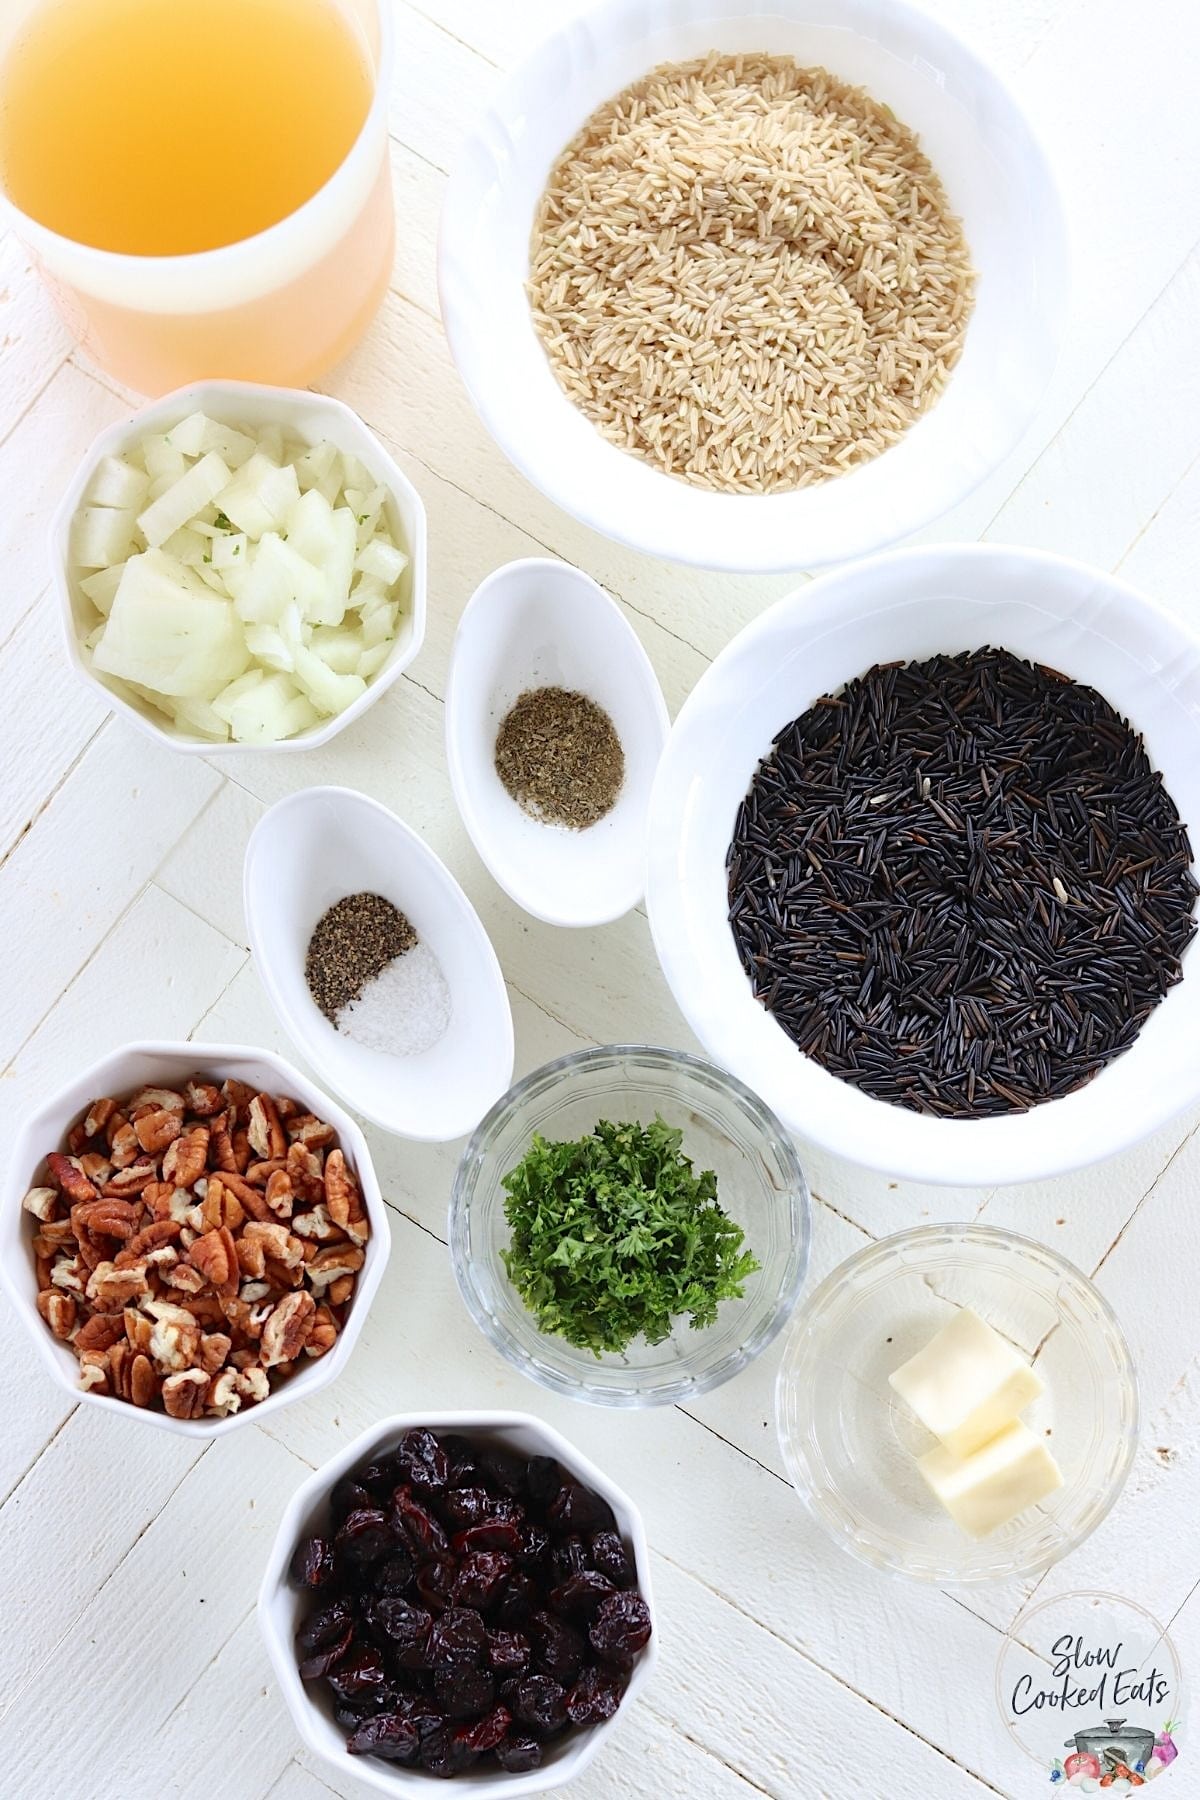 Crockpot brown rice ingredients on a white wooden board.